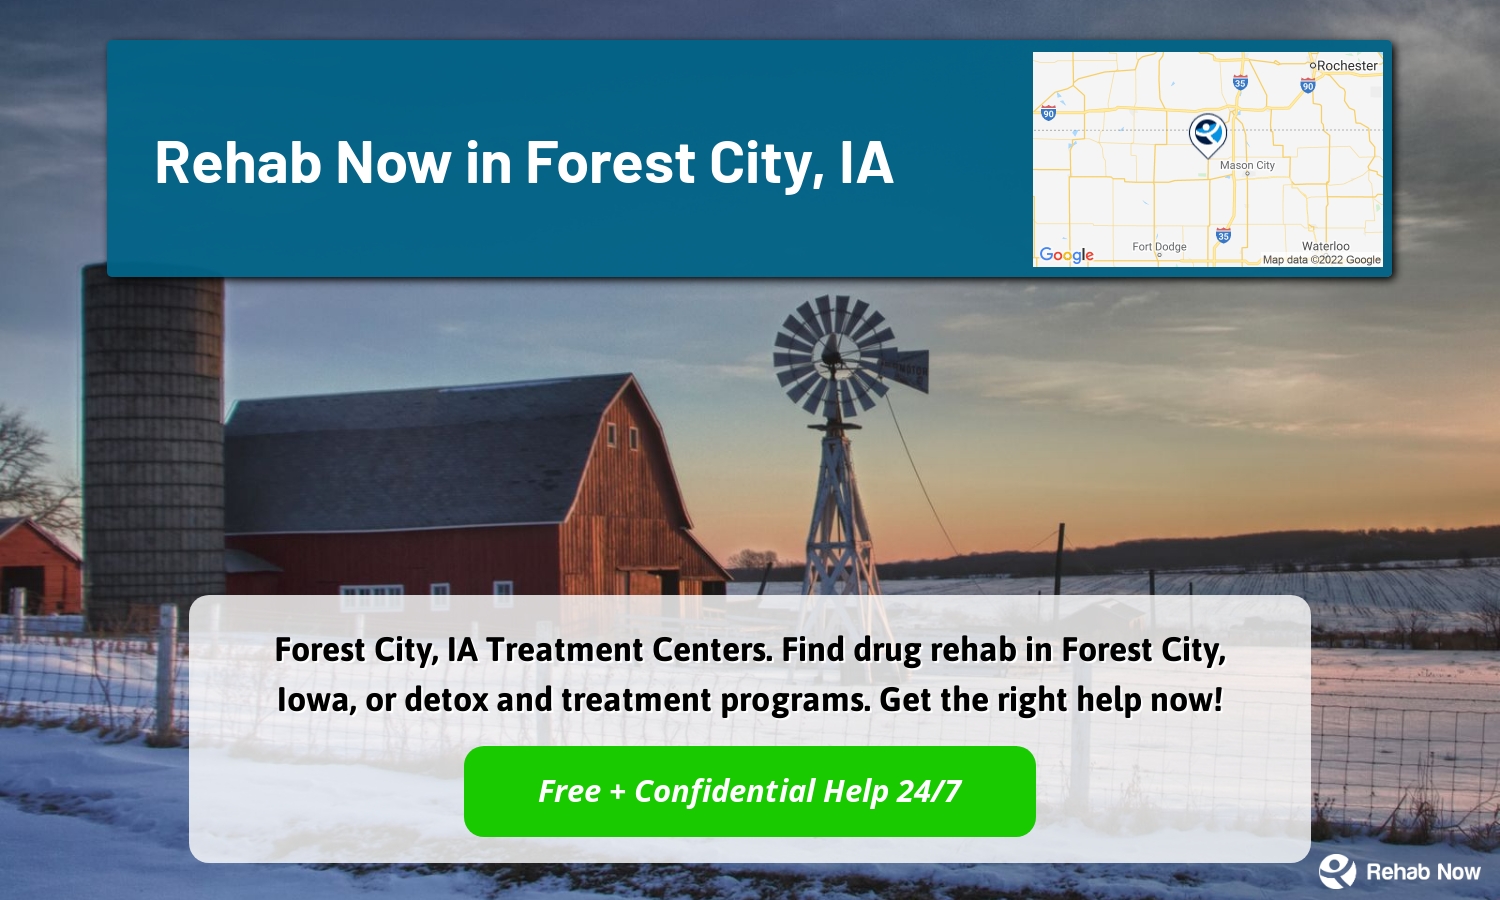 Forest City, IA Treatment Centers. Find drug rehab in Forest City, Iowa, or detox and treatment programs. Get the right help now!